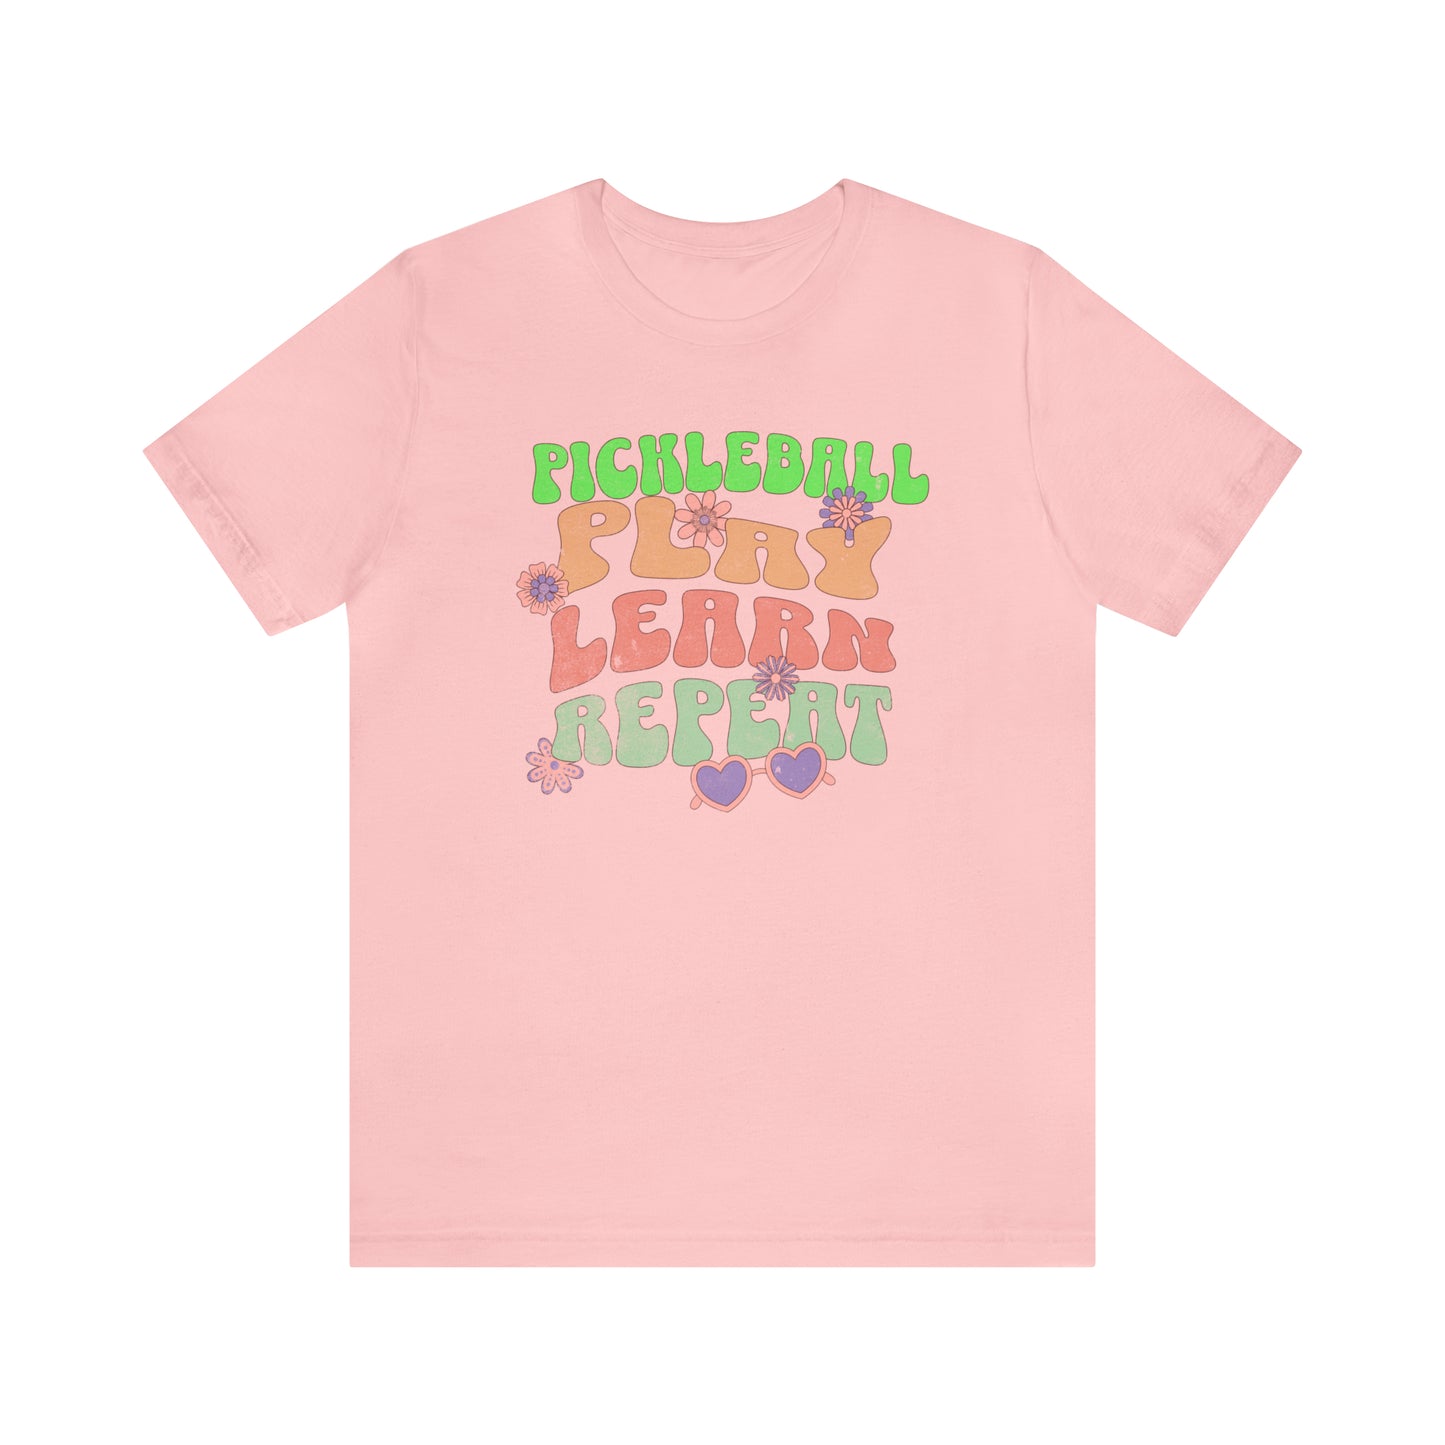 Play, Learn, Repeat - Pickleball Enthusiast T-Shirt